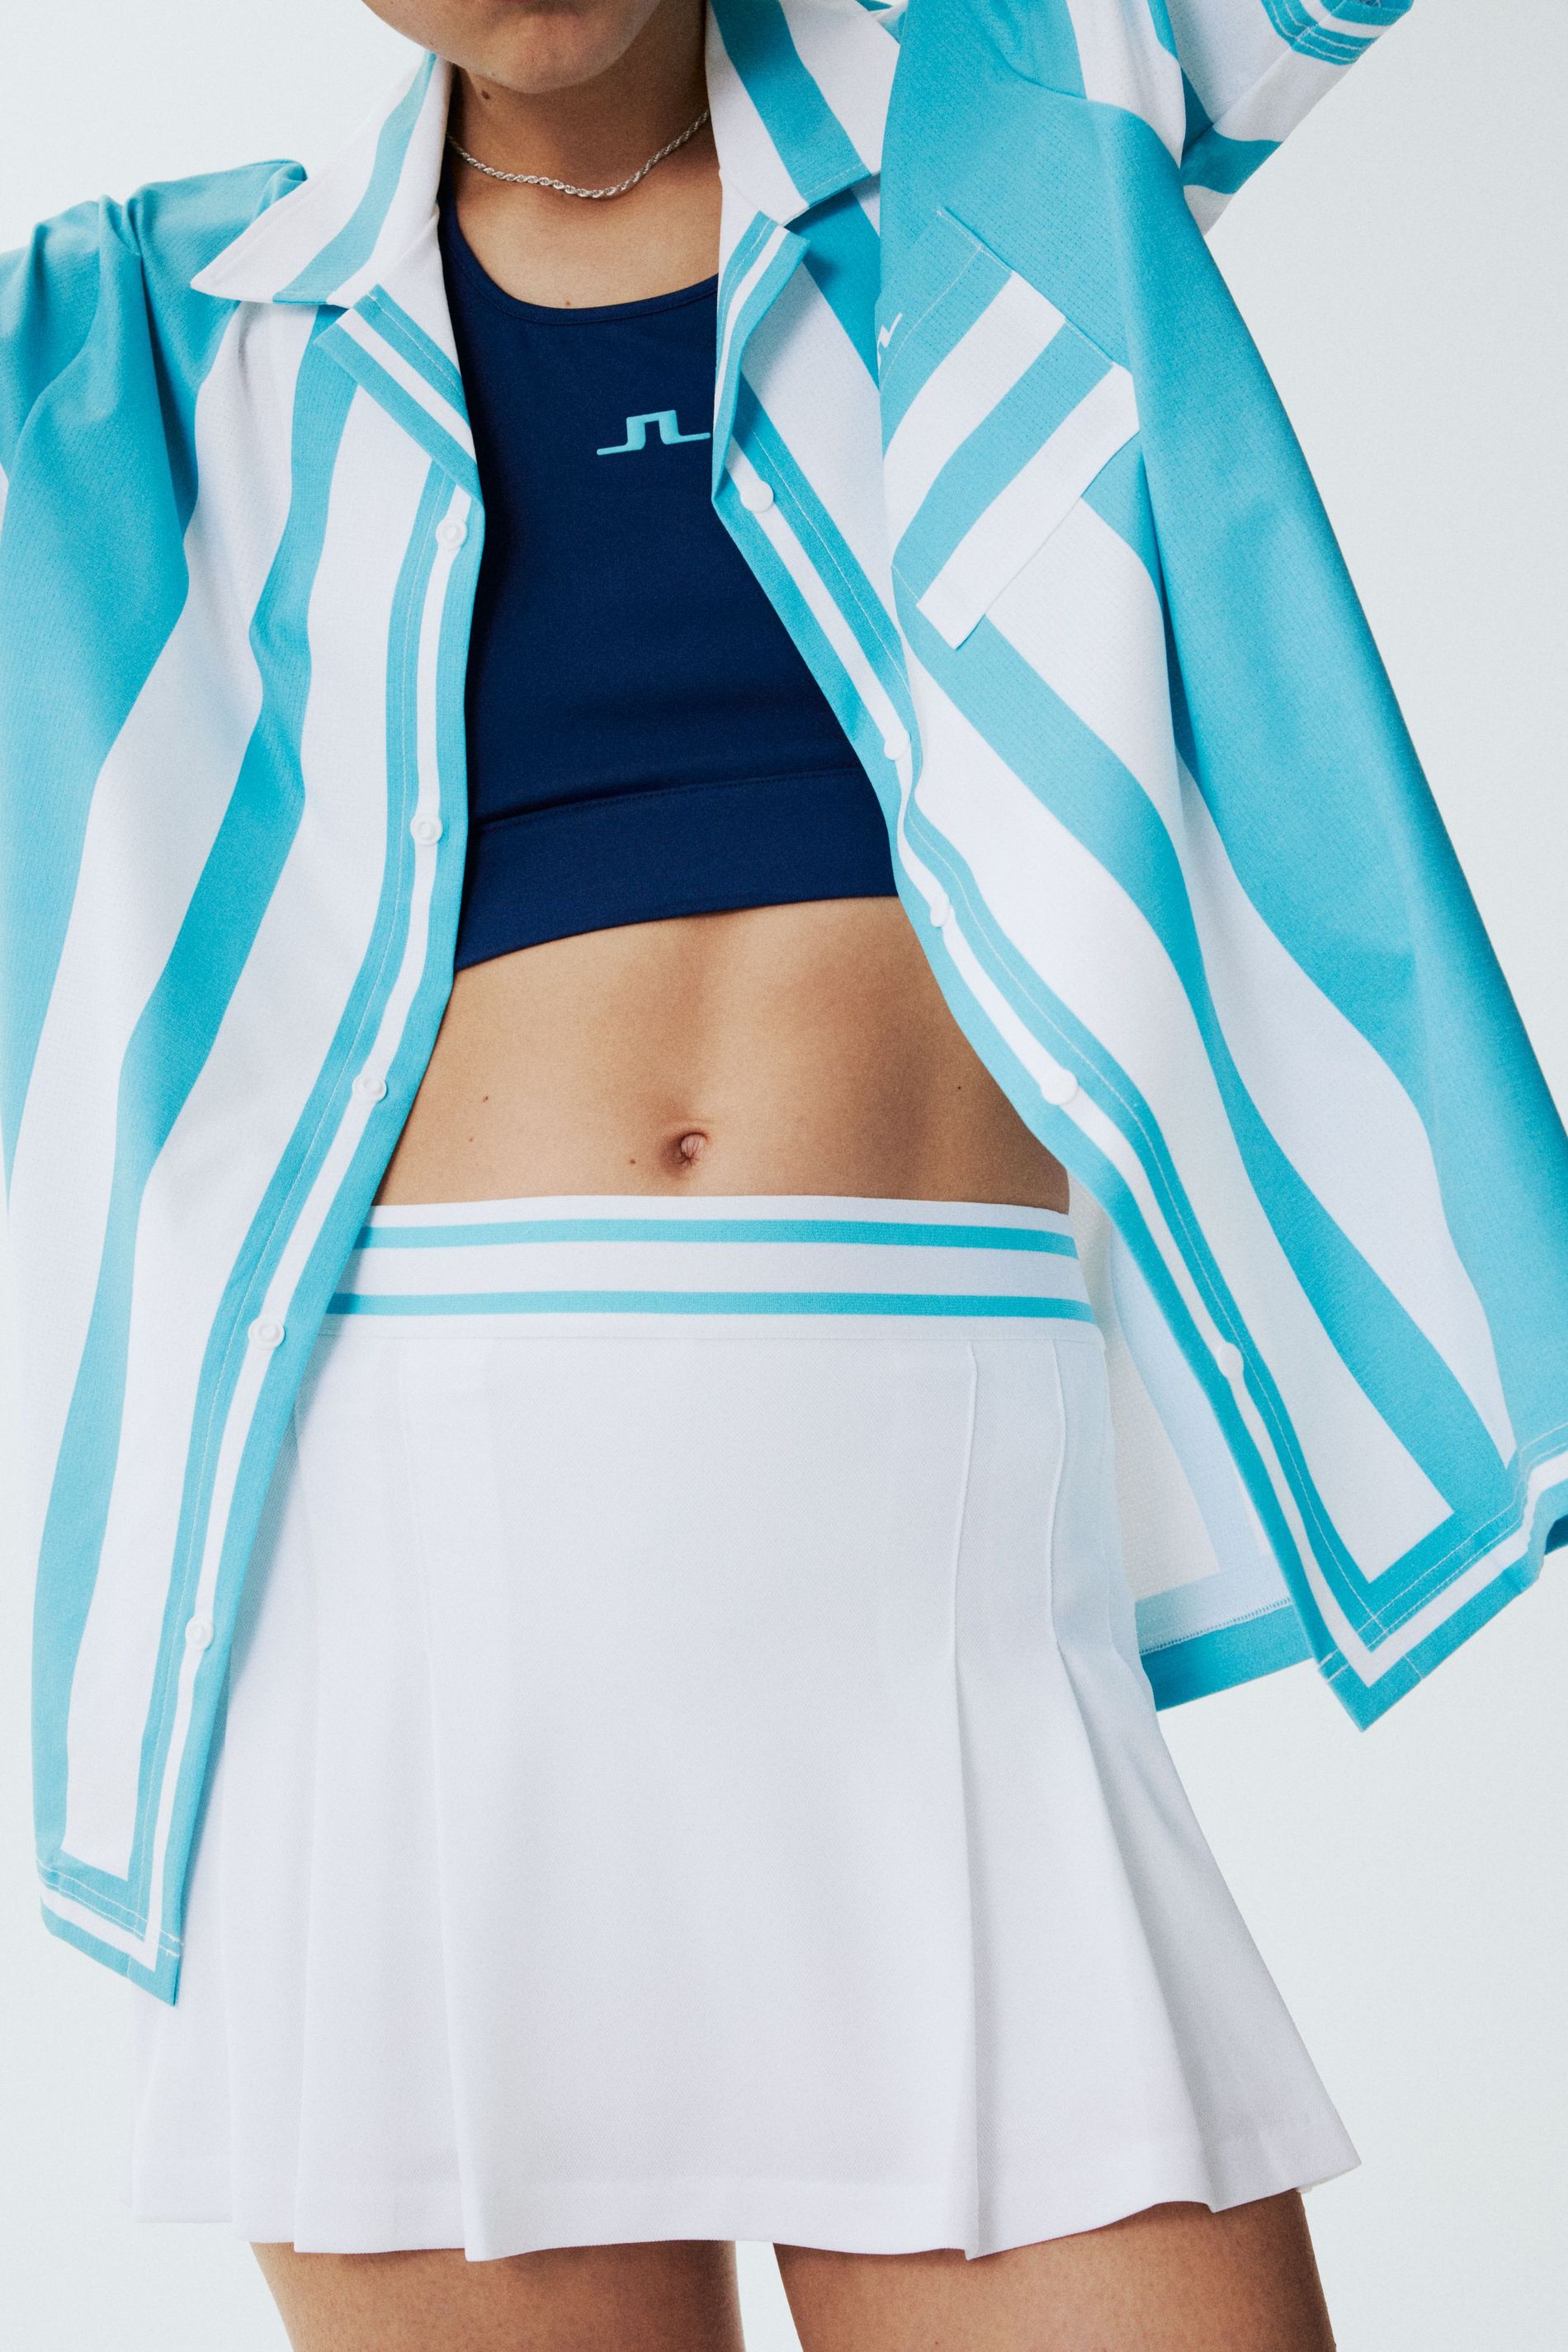 J.Lindeberg 2024 tennis collection - Pleated white tennis skirt with a navy bralet and a patterned teal polo shirt